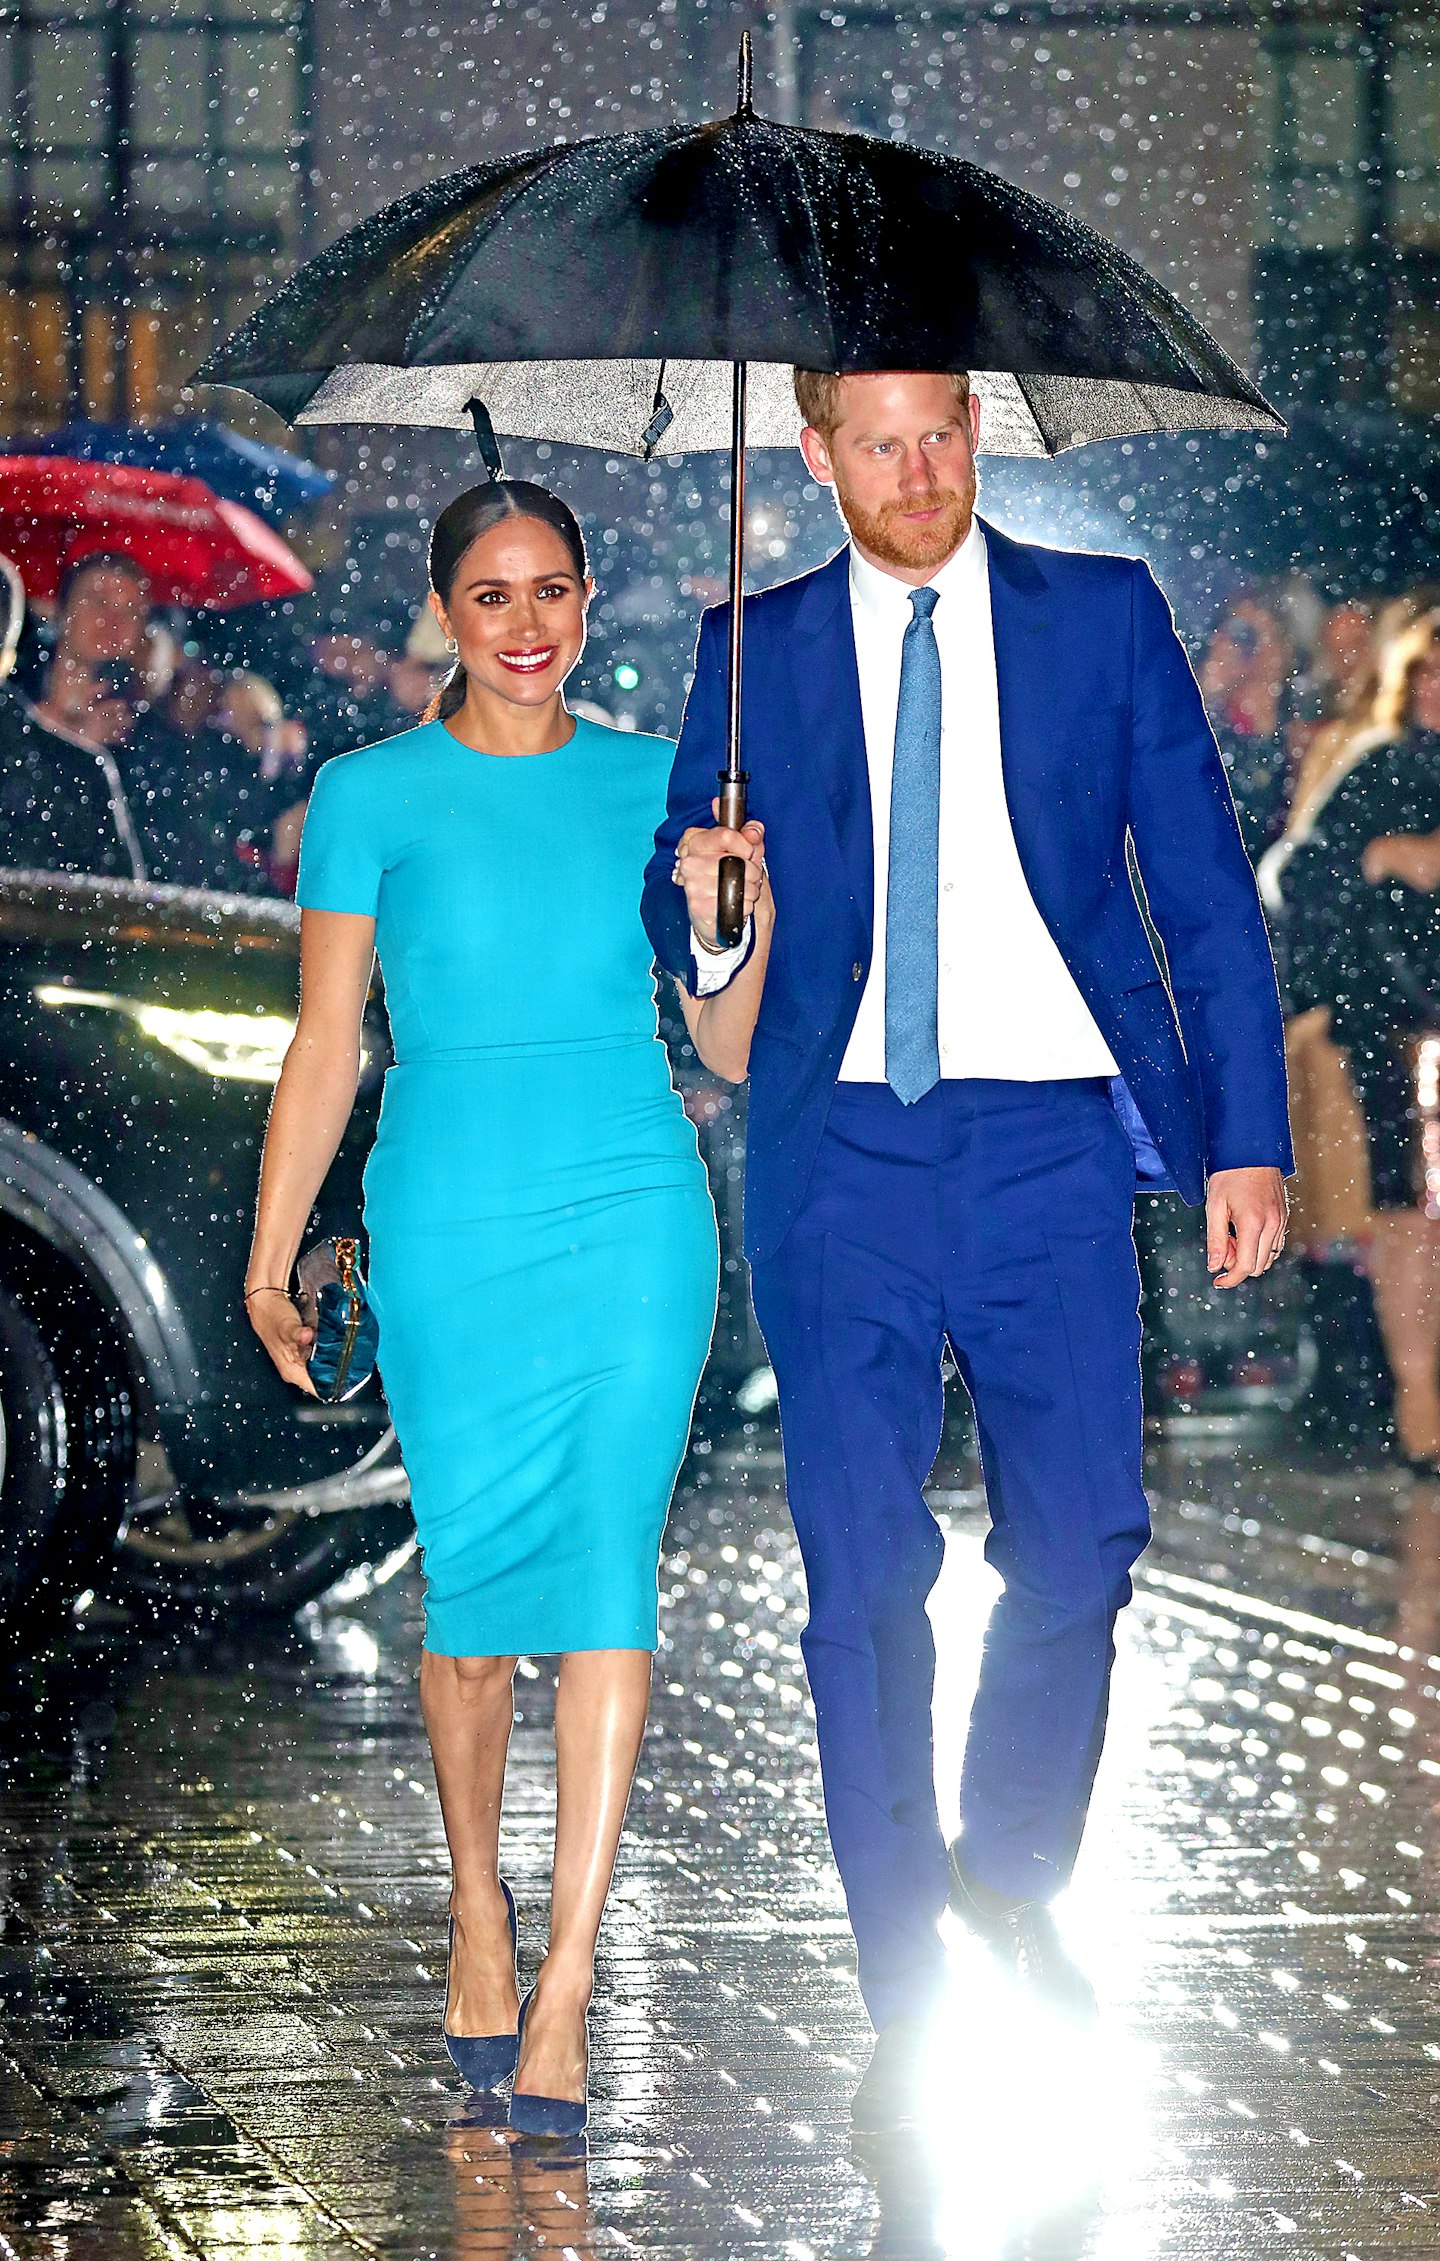 Meghan Markle and Prince Harry spotted out in rain